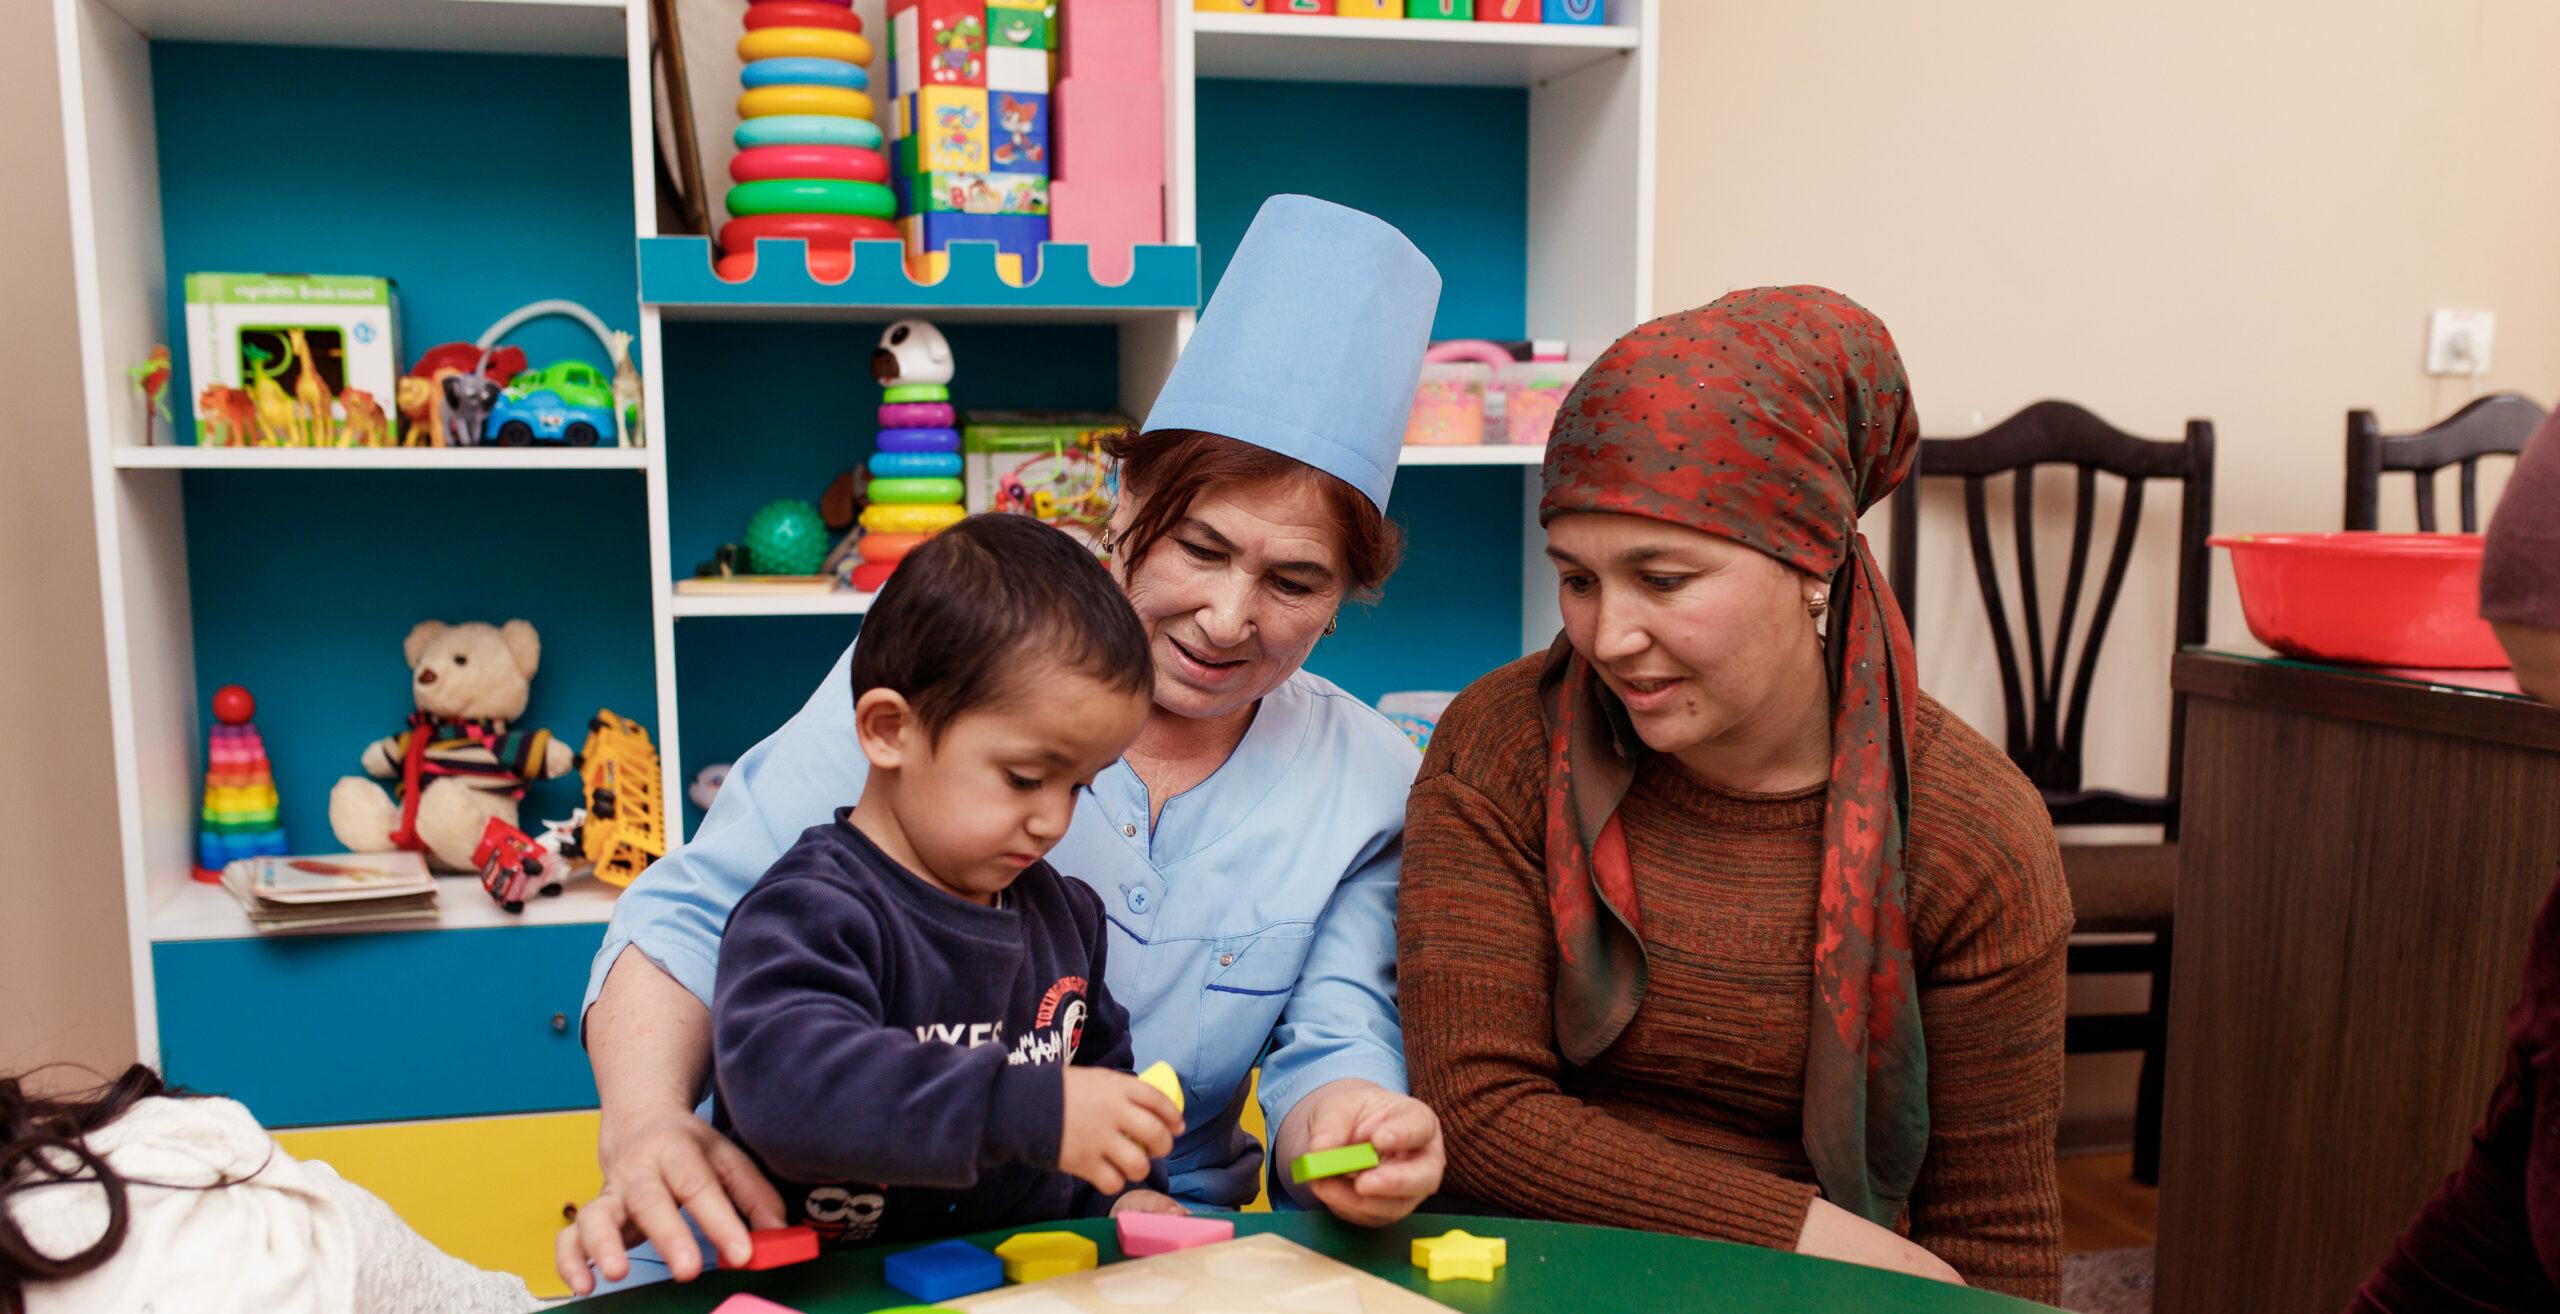 A picture of a child with a disability learning motor skills with her grandmother and a social worker at the UNICEF-supported Family and Child Support Center in Tajikistan